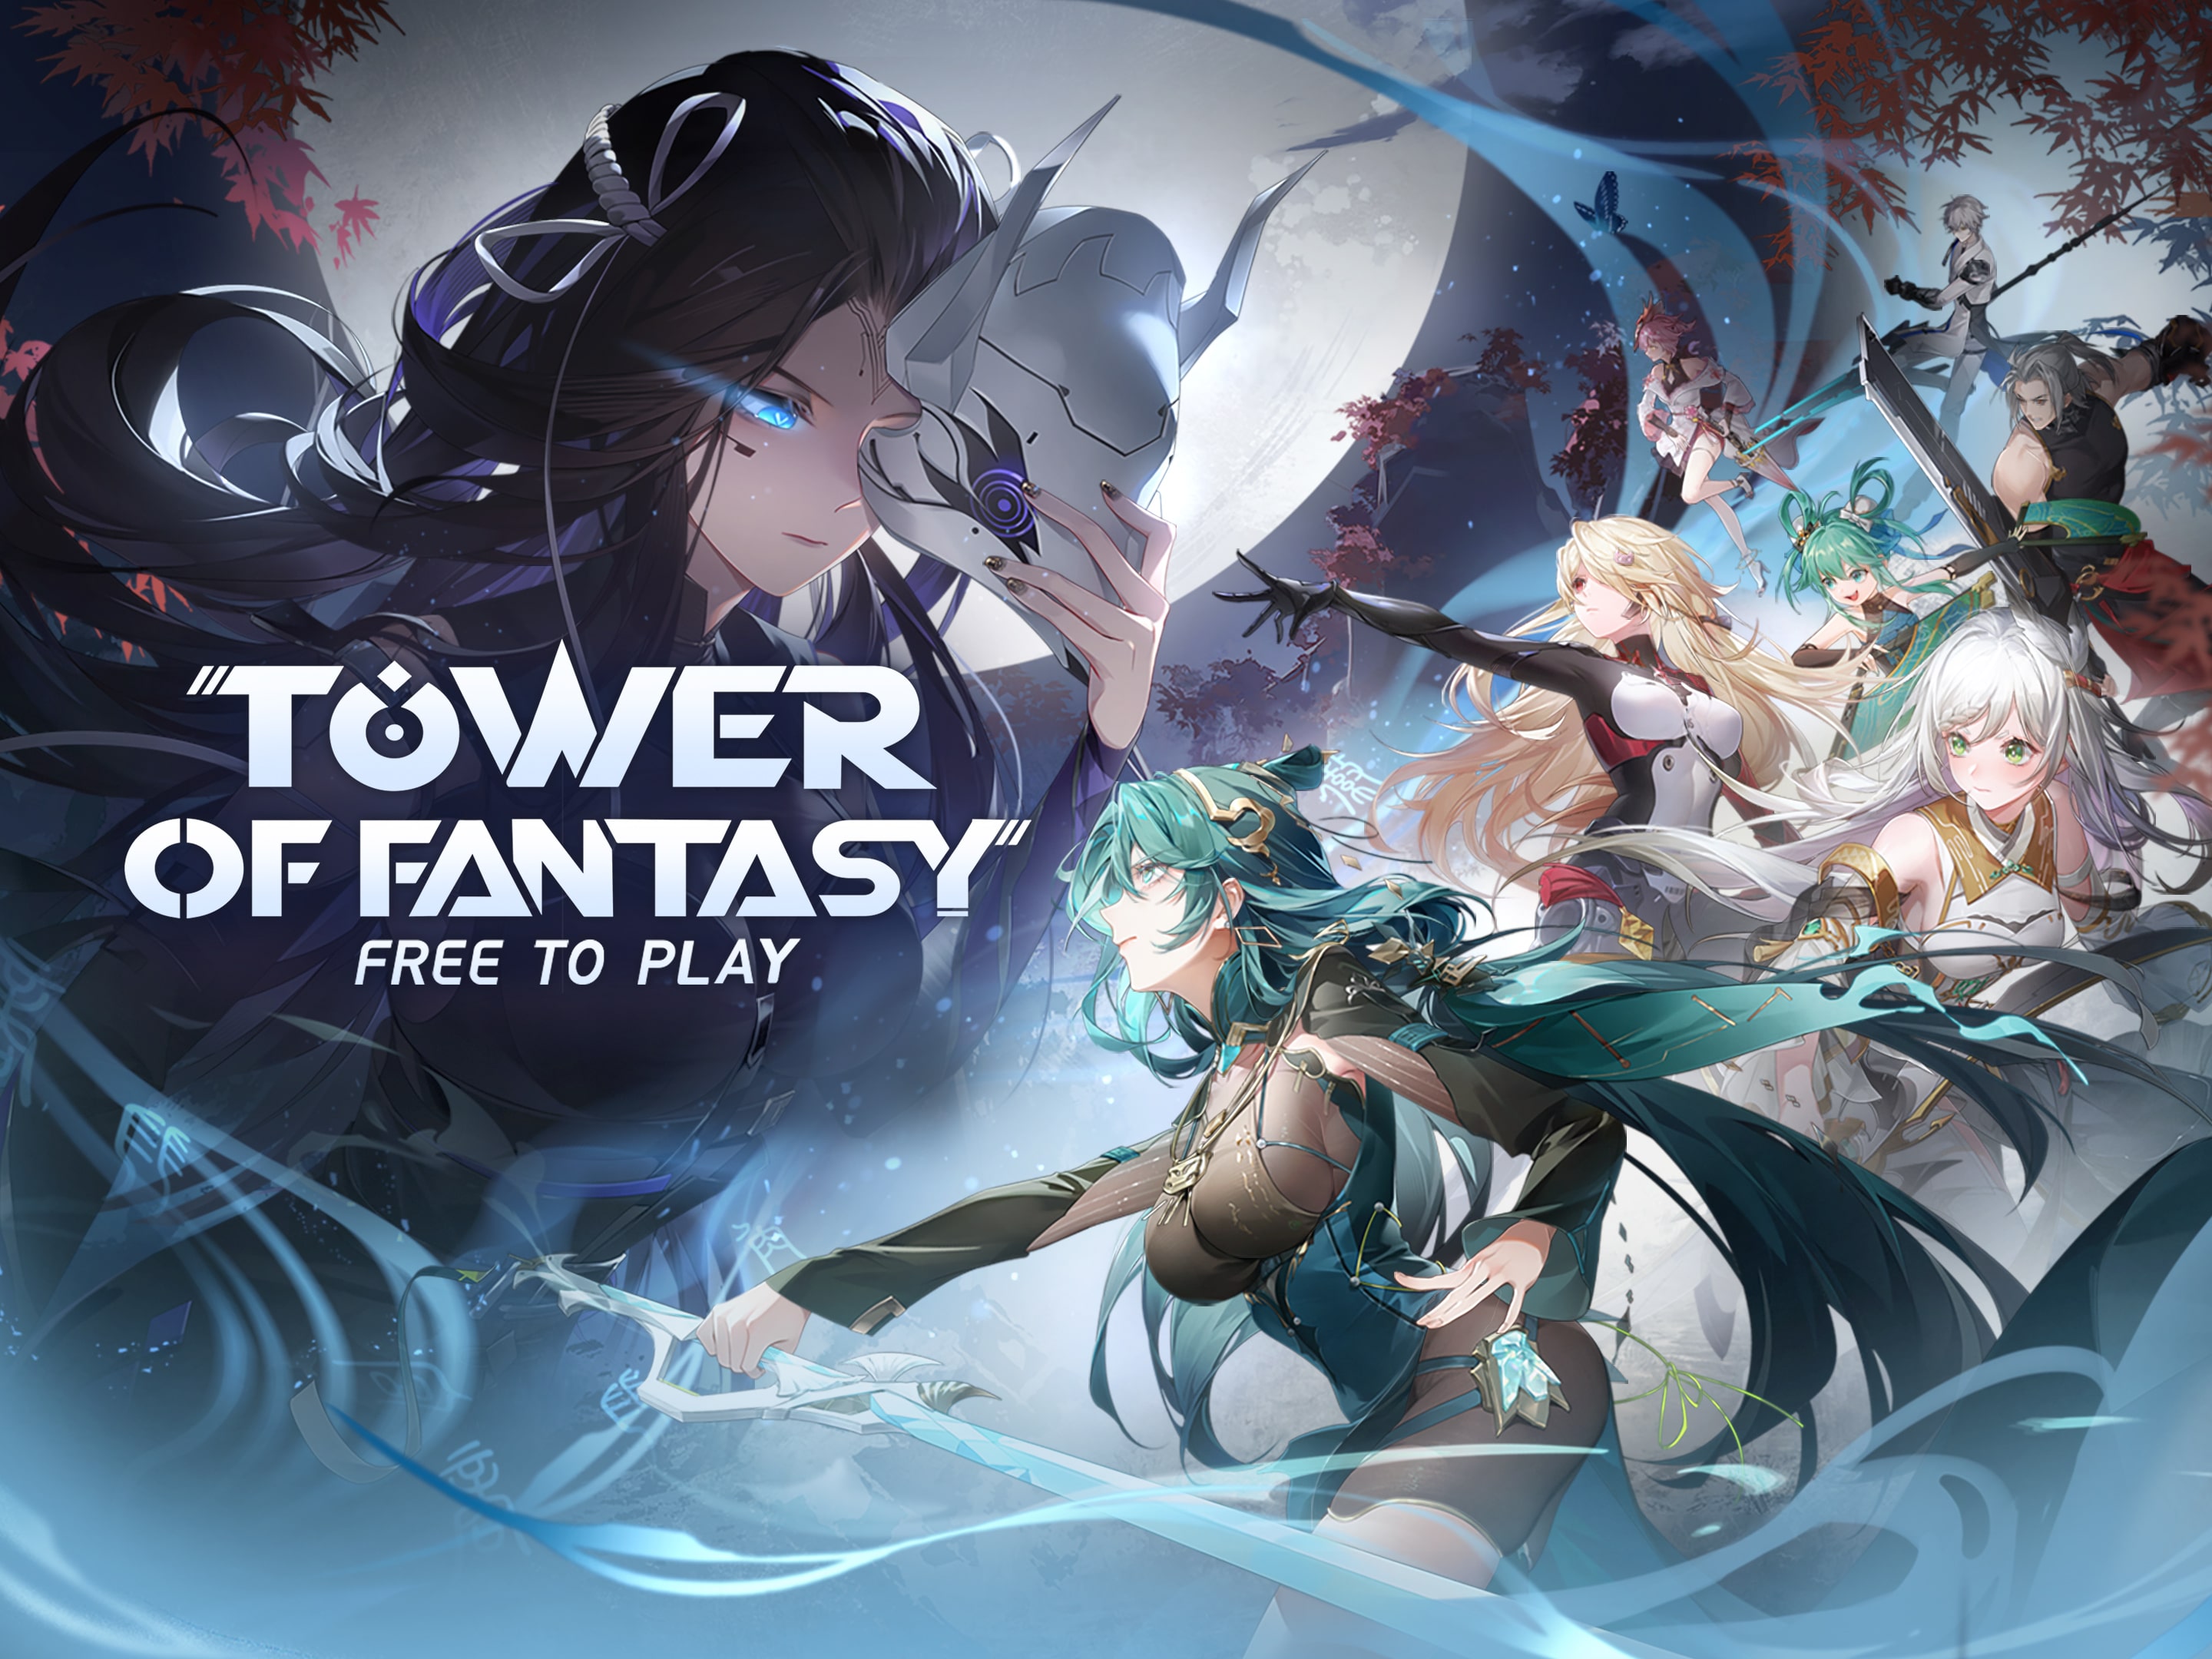 Tower of Fantasy release date, system requirements, and more